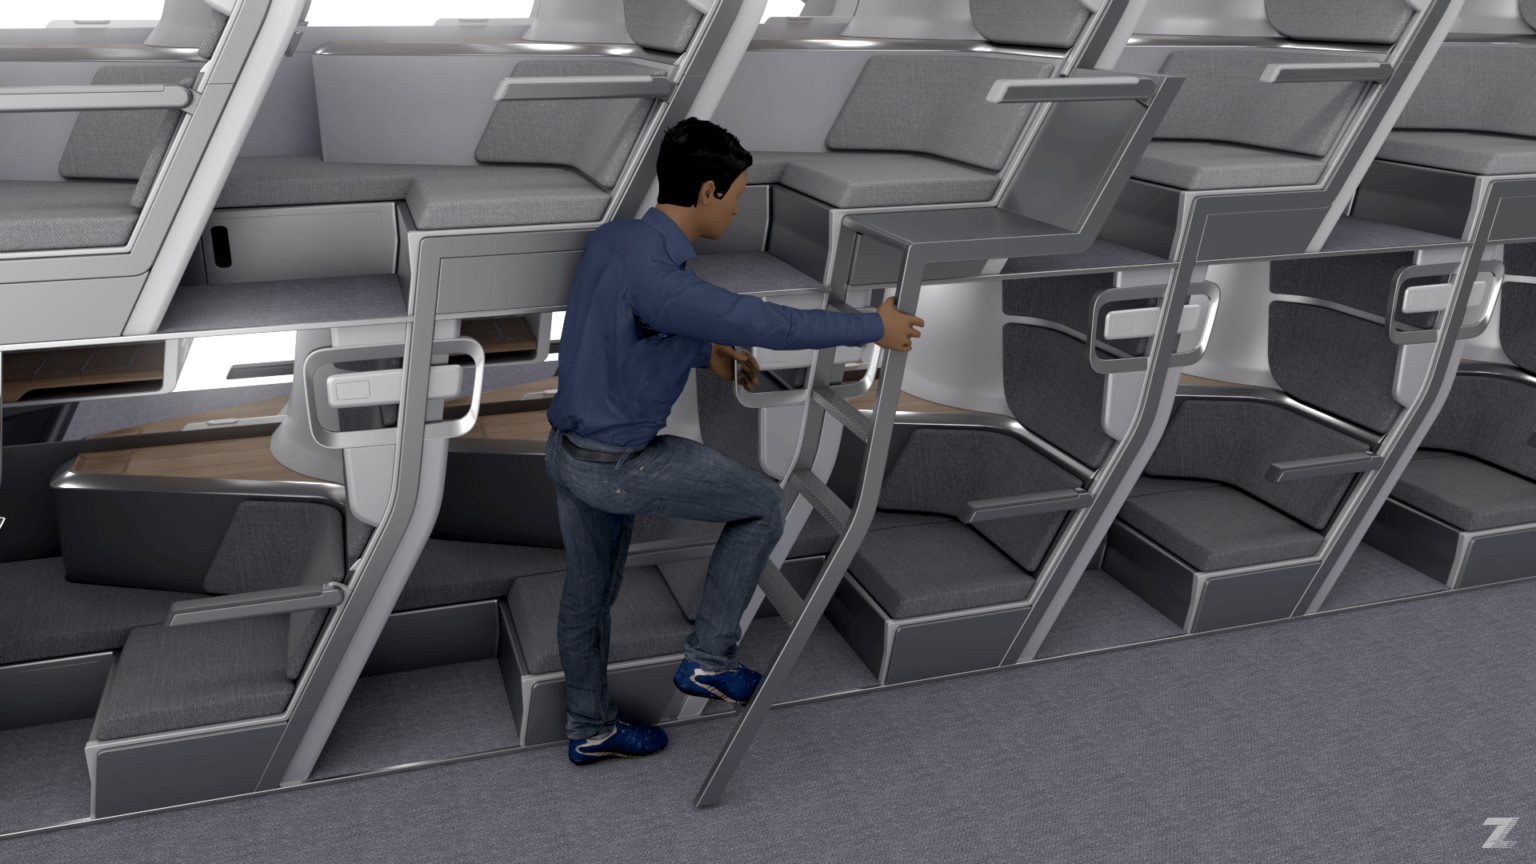 These New Economy Seat Concepts Are Getting Interesting